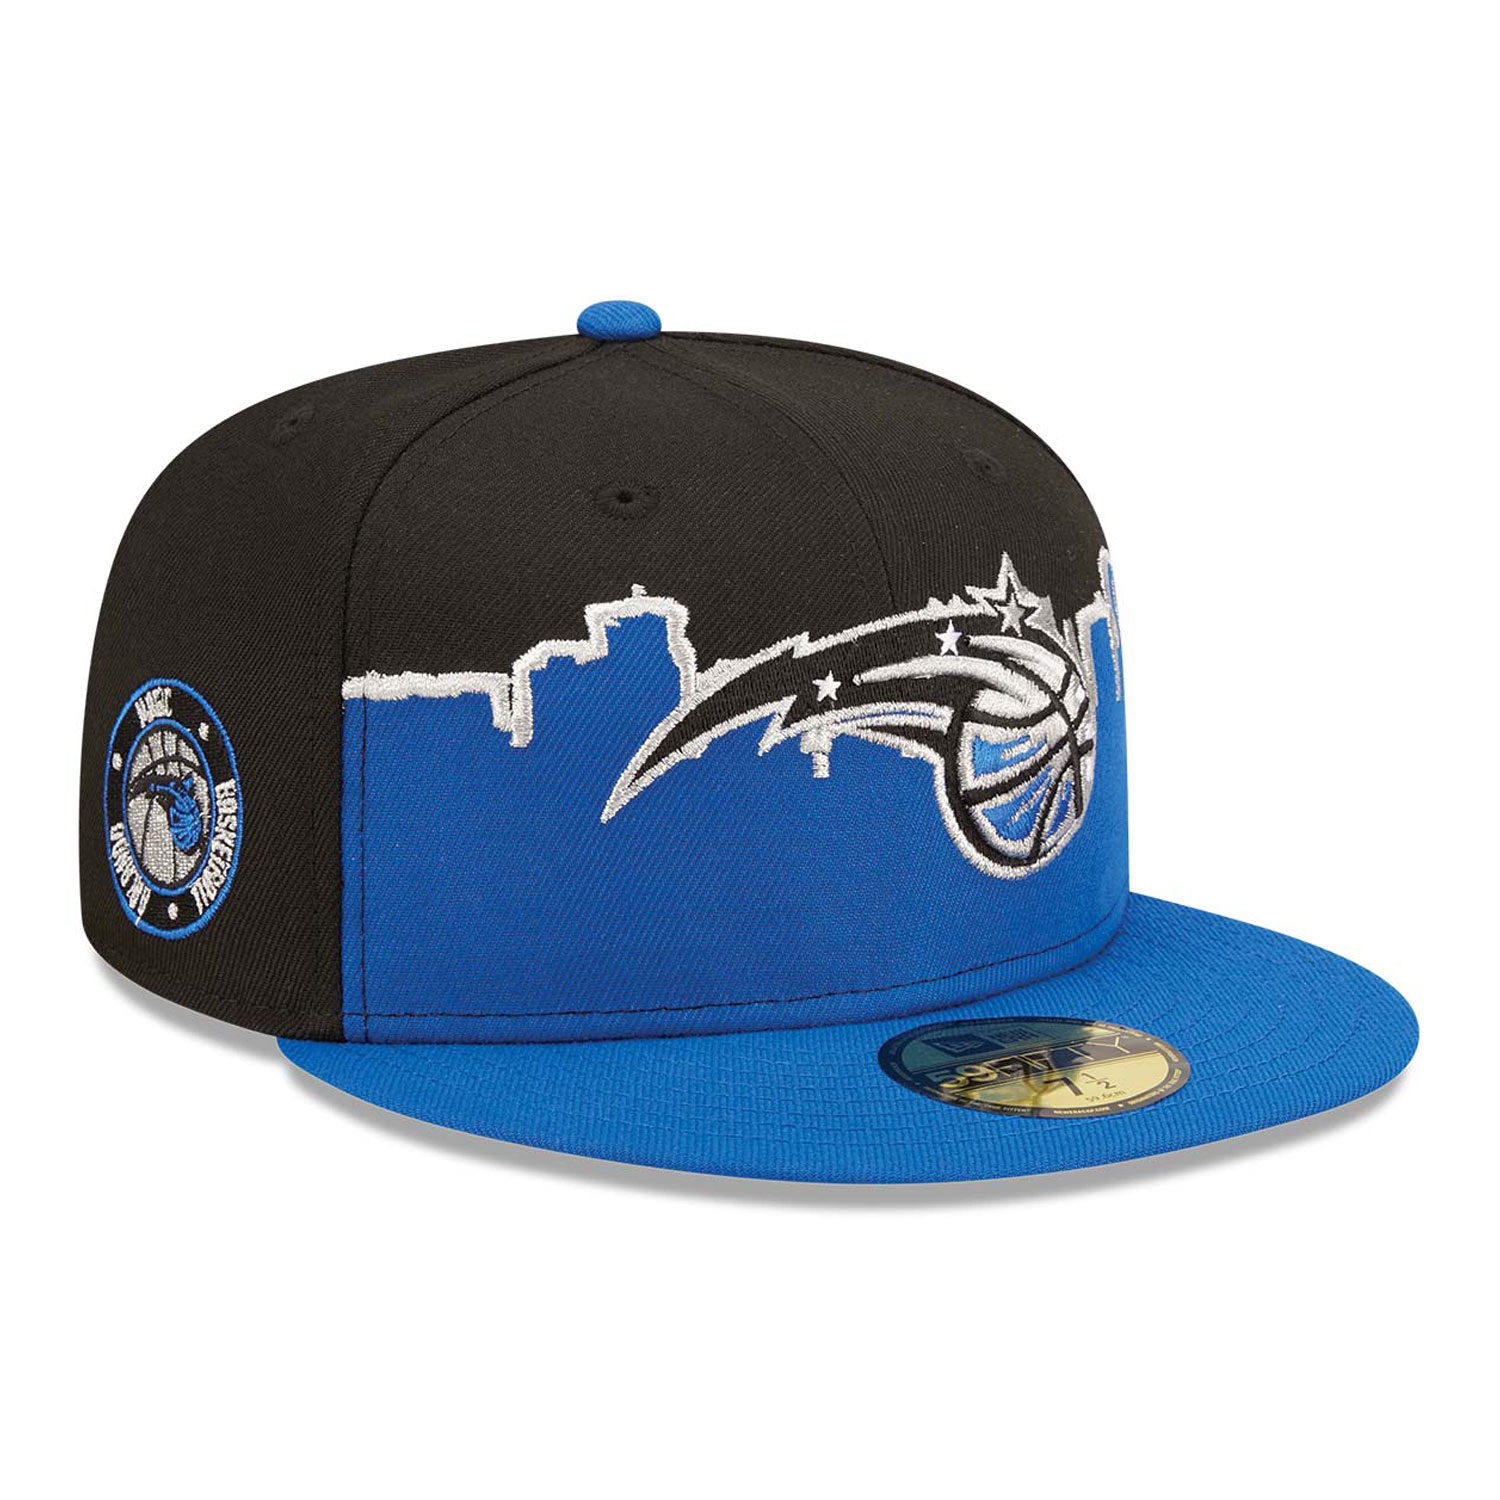 Official New Era NBA Tip Off Orlando Magic Black 59FIFTY Fitted Cap